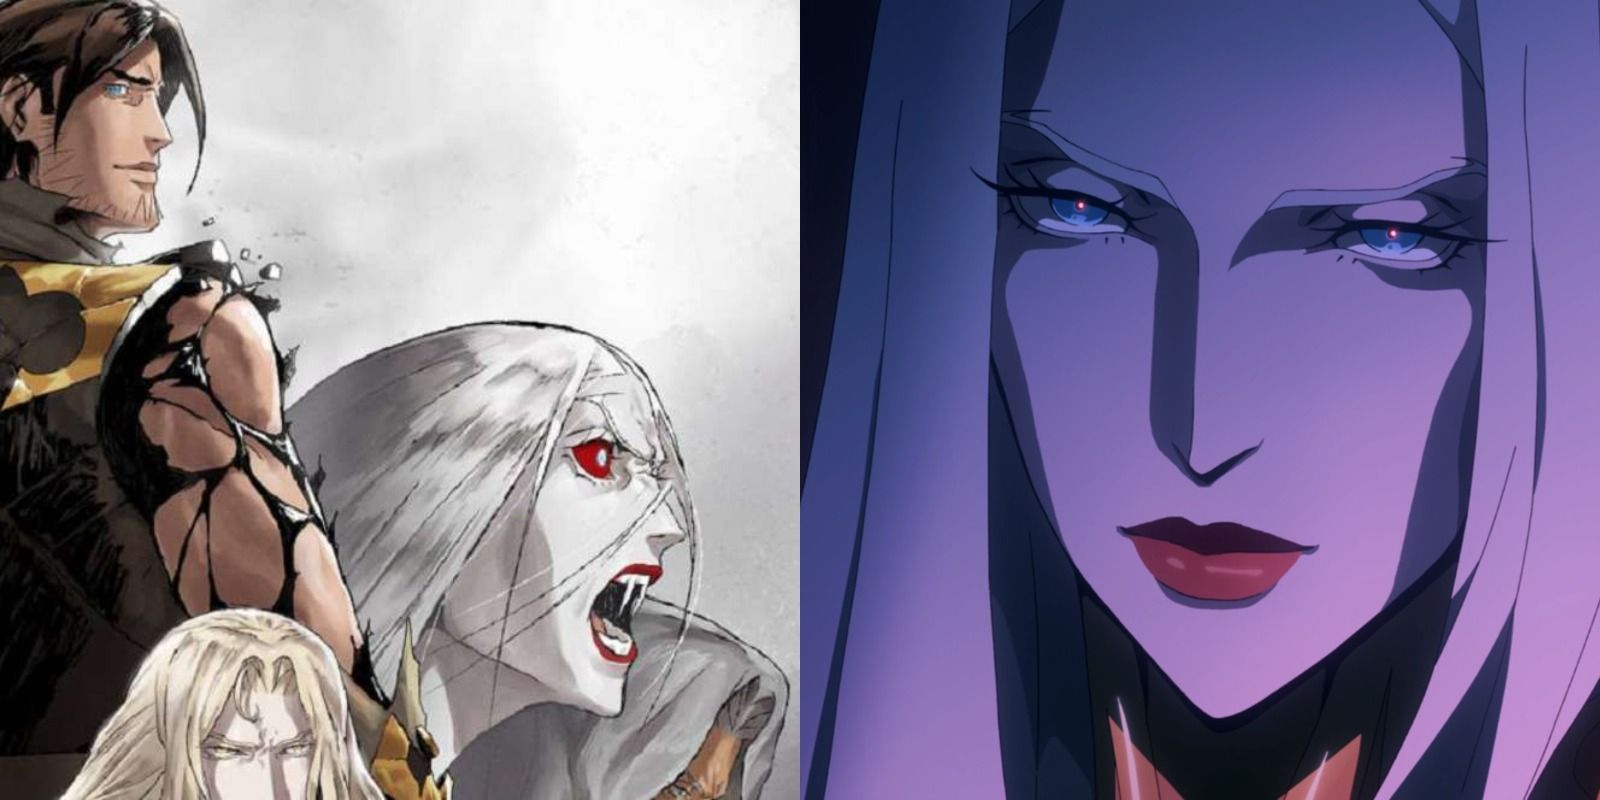 Carmilla on the season 4 poster of Castlevania and in the series